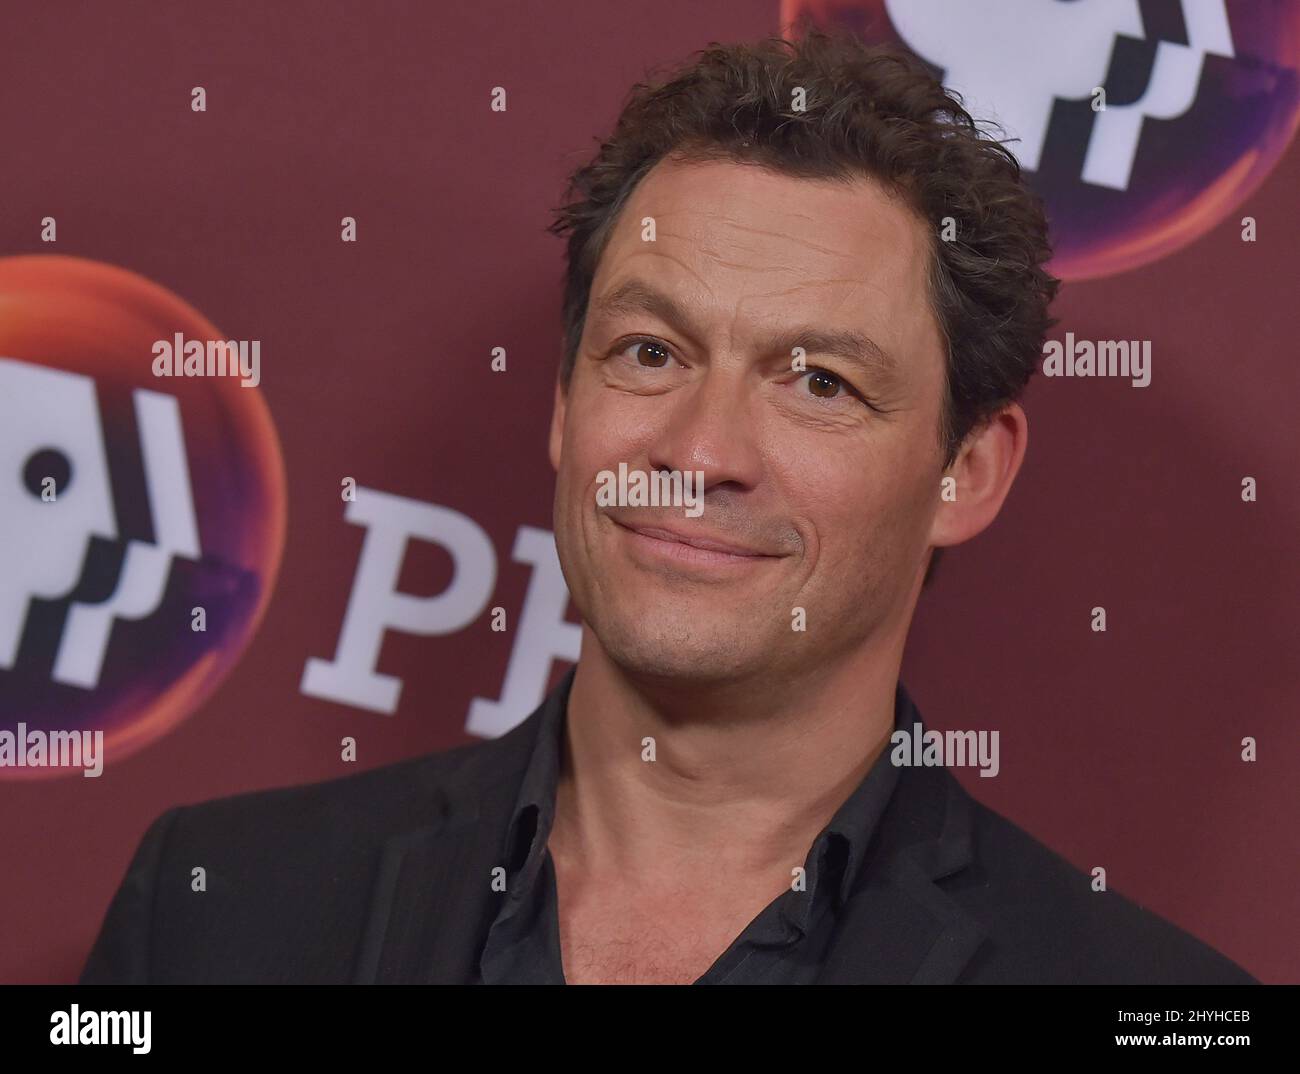 Dominic West at PBS Masterpiece's Photo Call for shows including Mrs. Wilson, Les Miserables, Endeavour, Grantchester at the Langham Huntington Hotel on February 01, 2019 in Pasadena, CA. Stock Photo